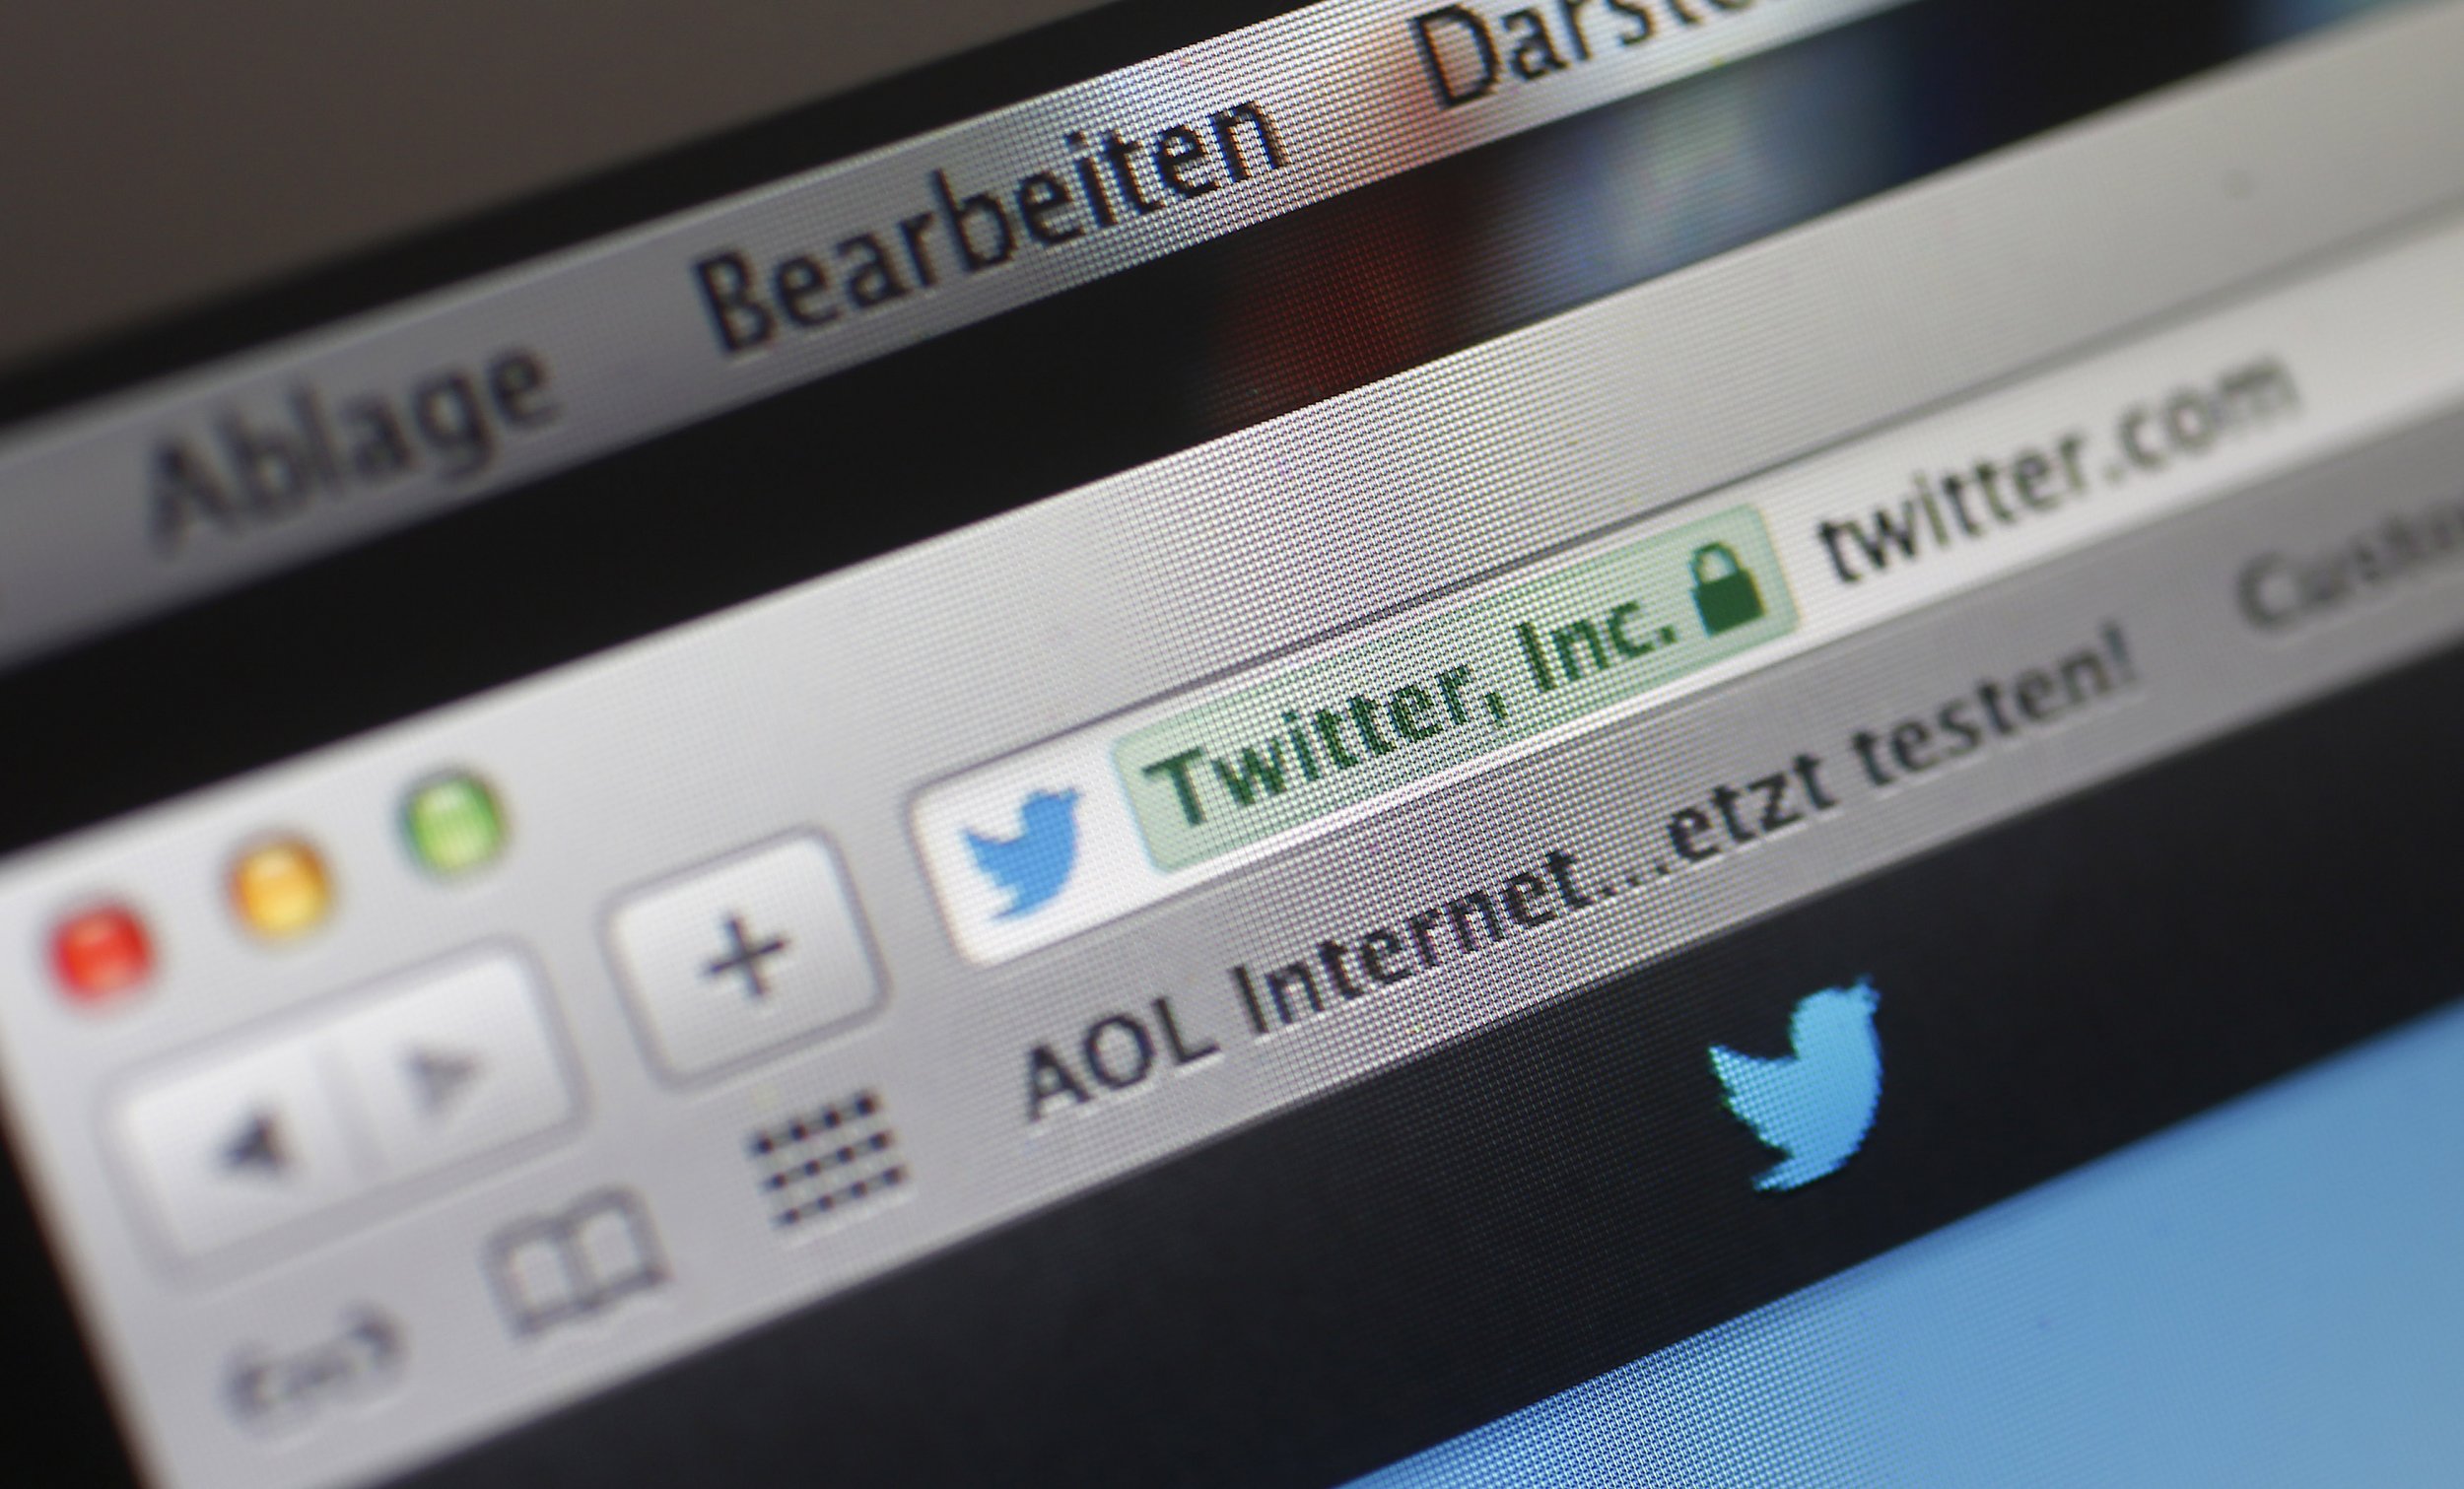 Twitter use in Germany